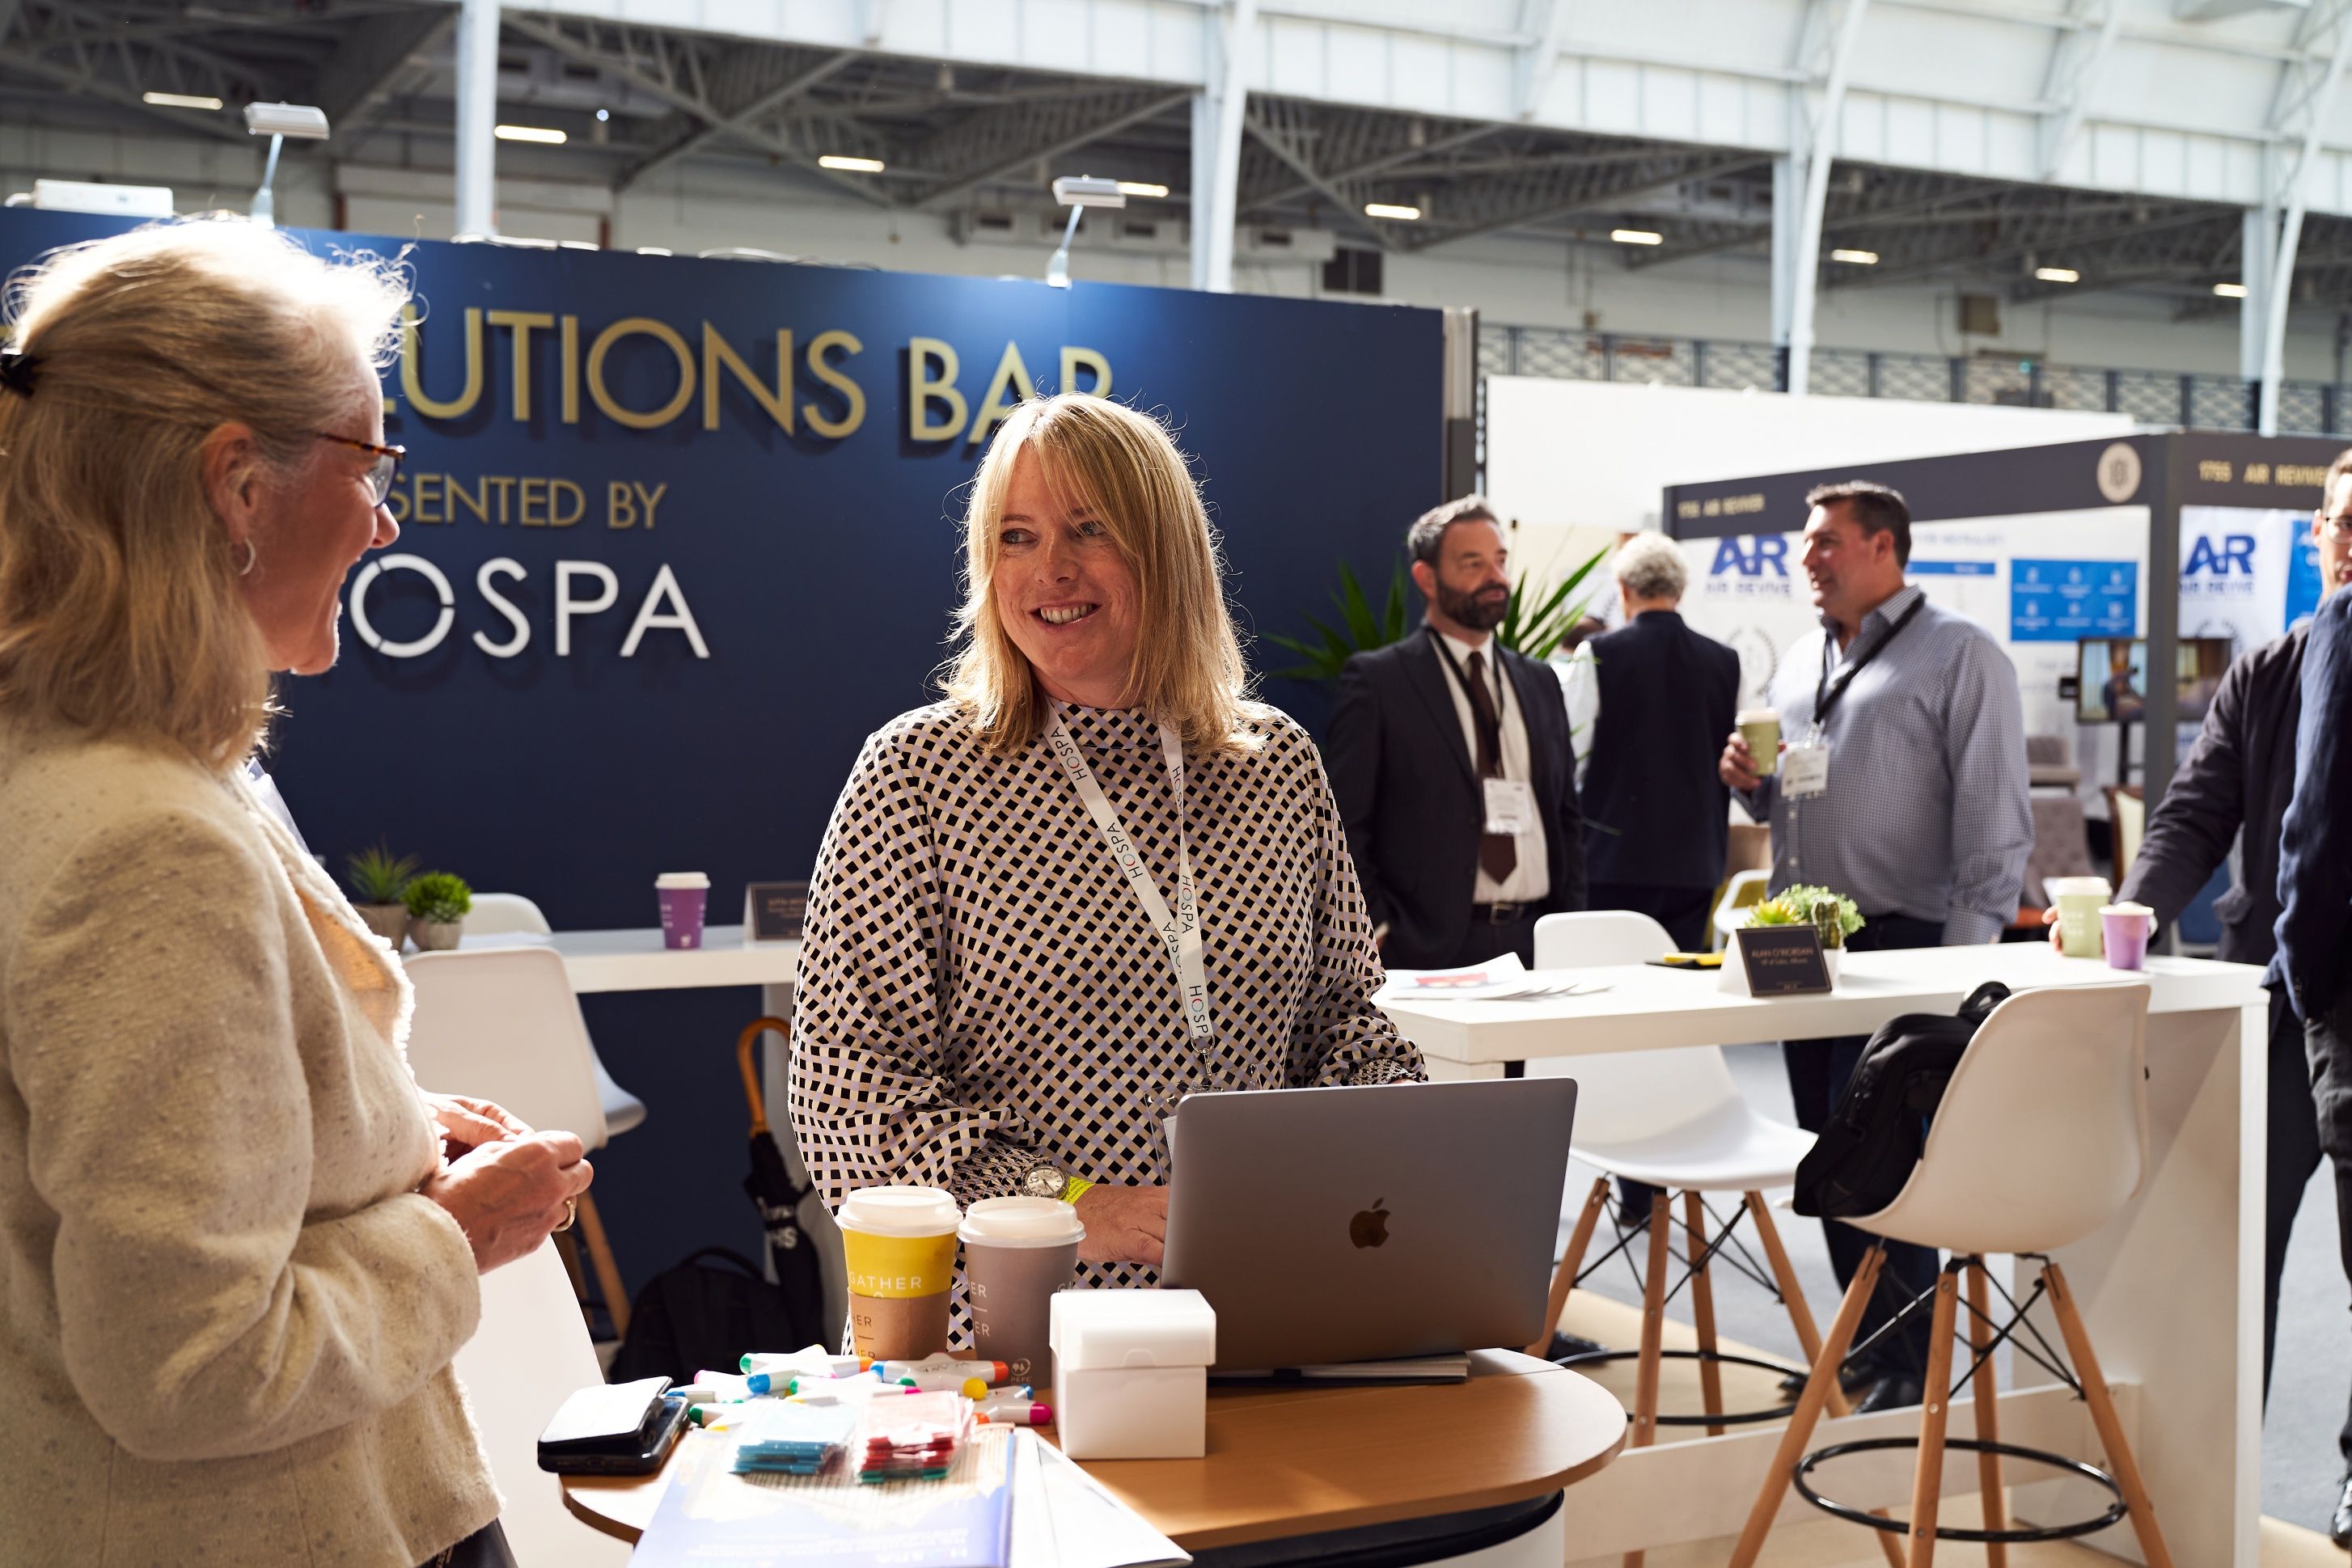 BUSINESS SOLUTIONS BAR PRESENTED BY HOSPA & HMA